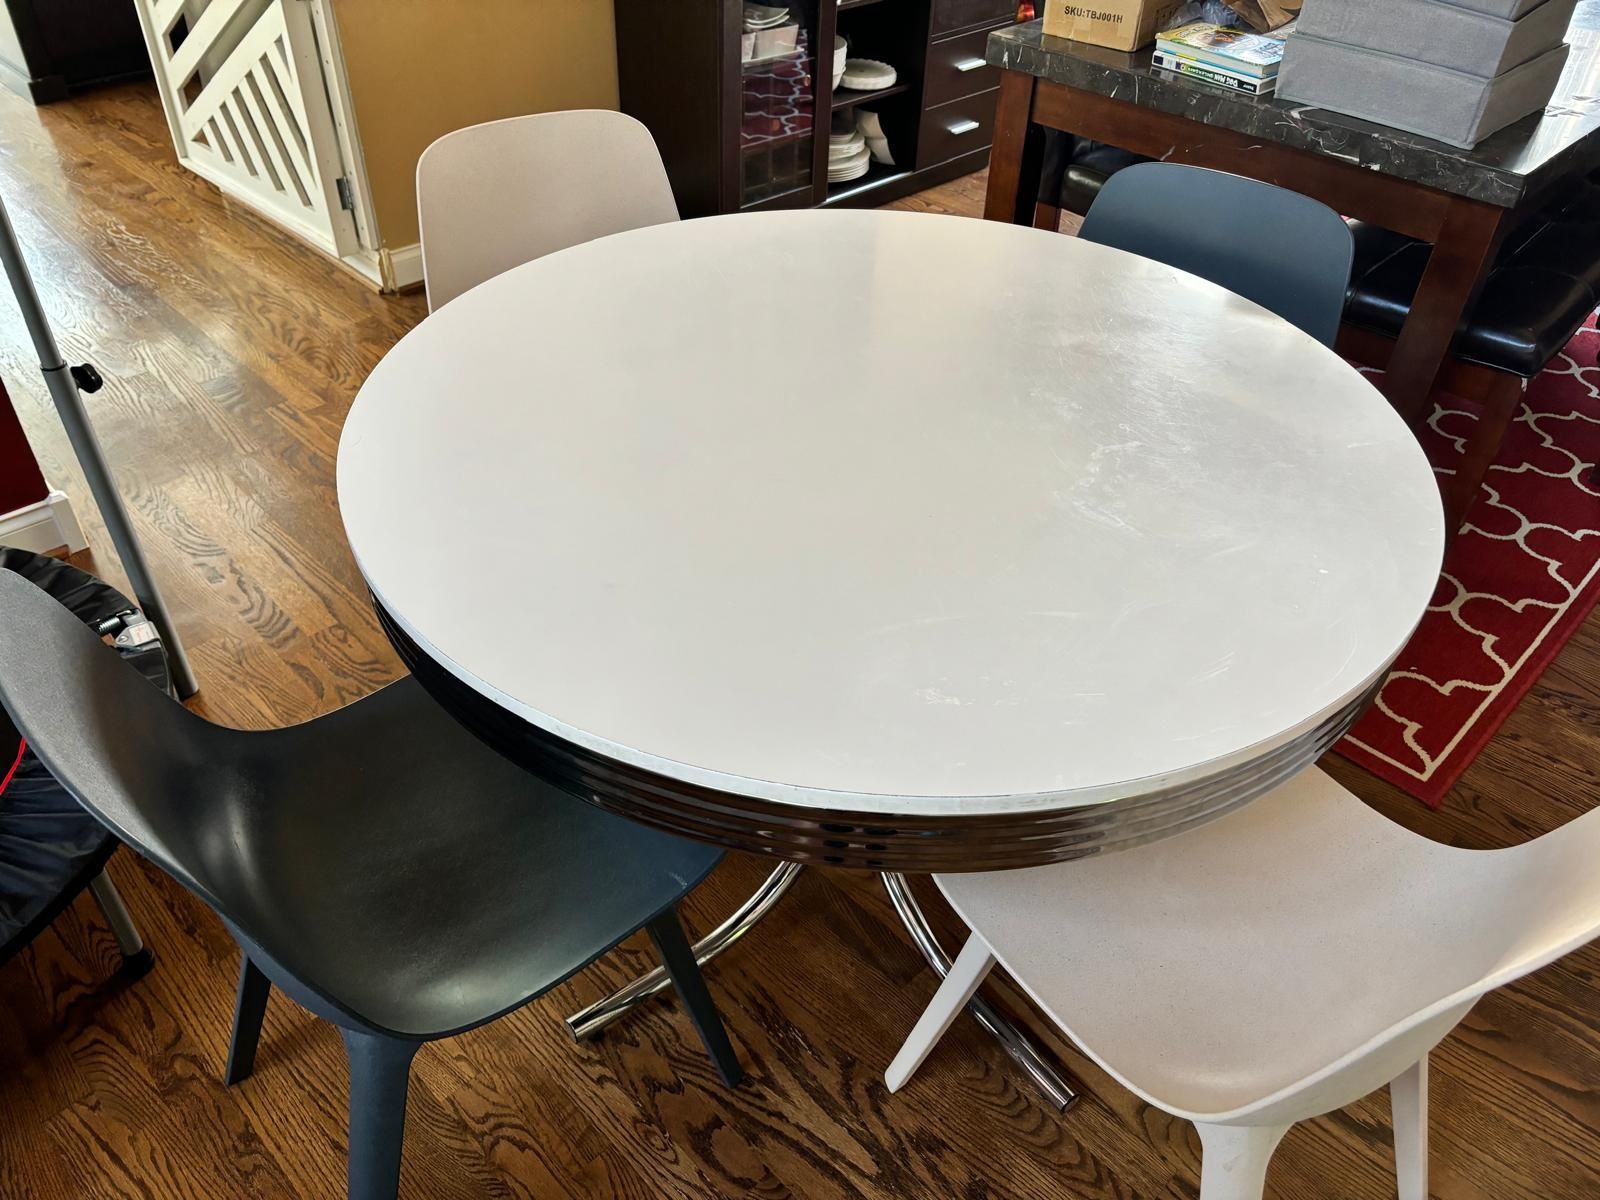 Breakfast Table With 4 Chairs